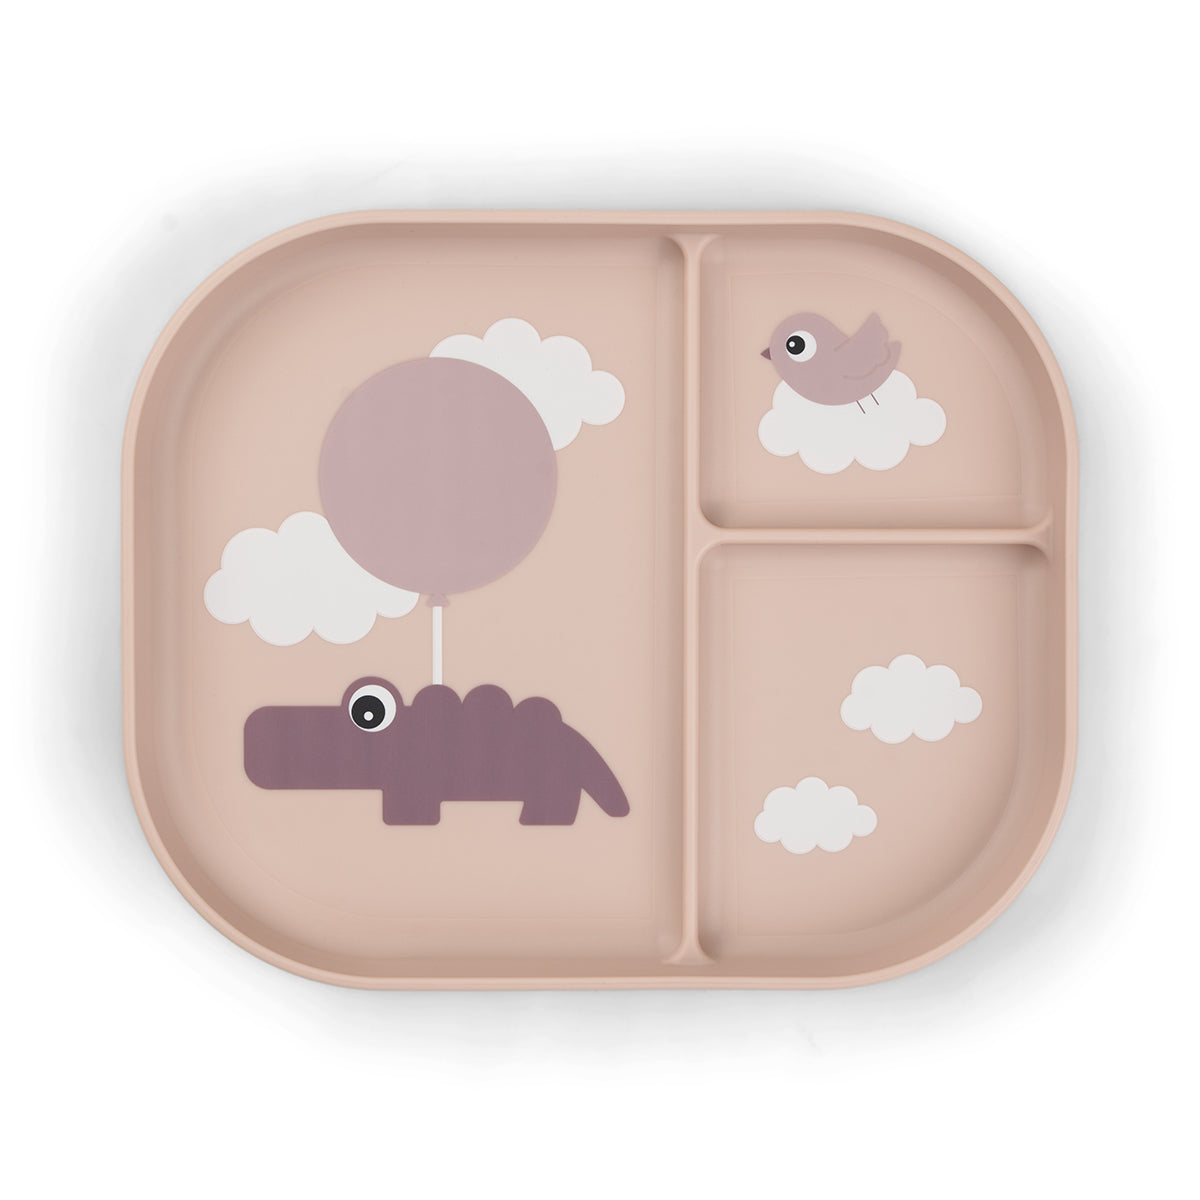 Foodie compartment plate - Happy clouds - Powder